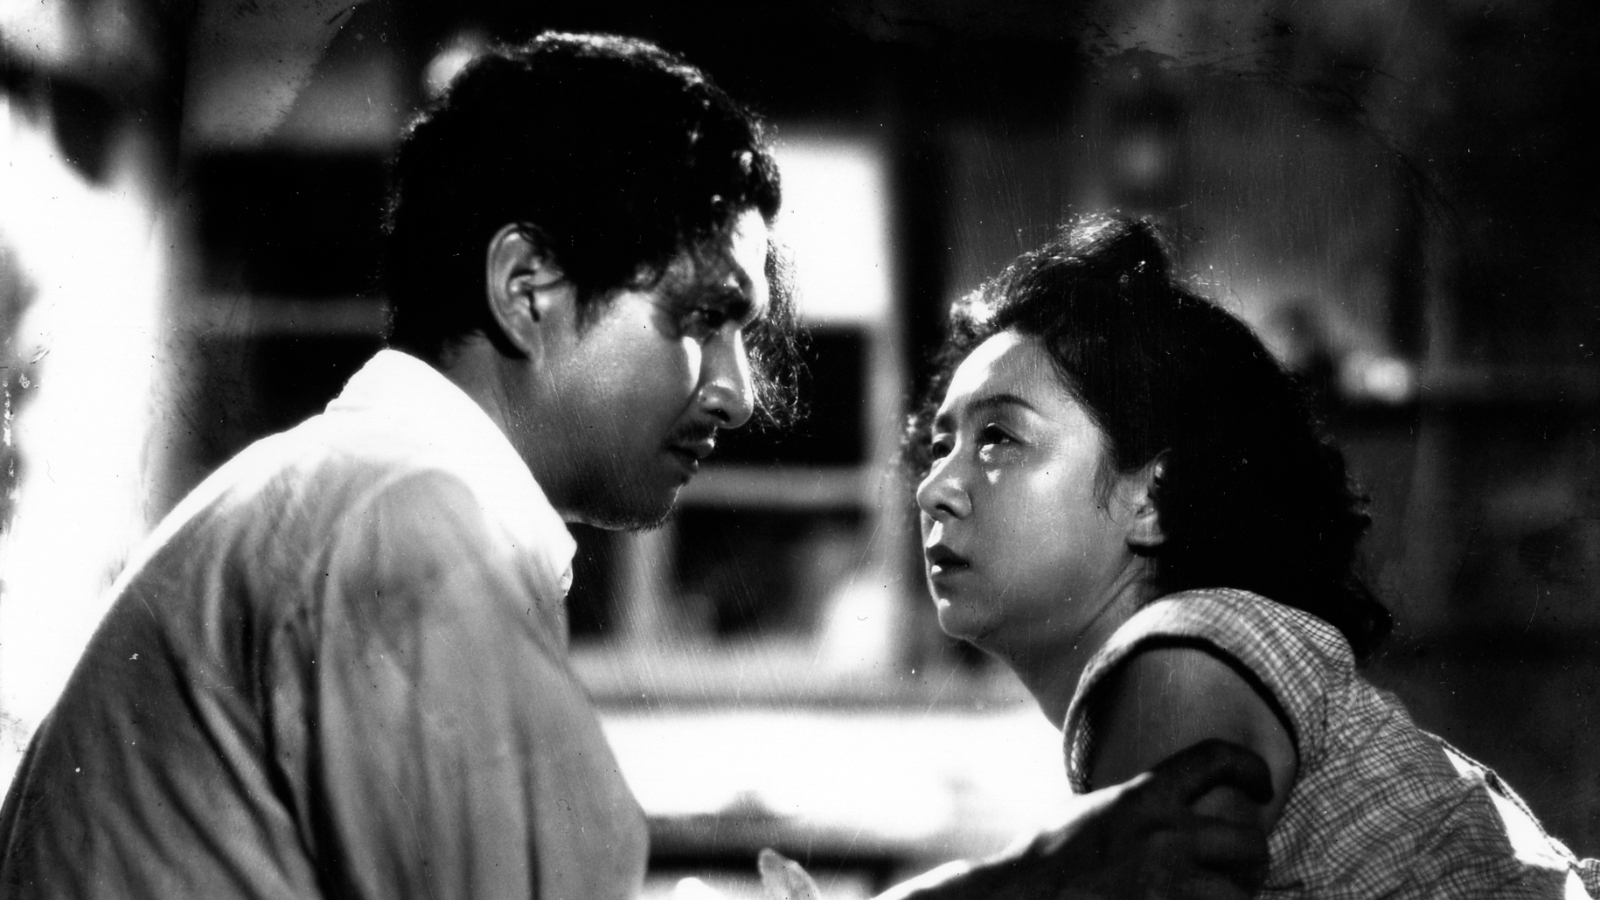 Chibusa yo eien nare (Forever a Woman). 1955. Directed by Kinuyo